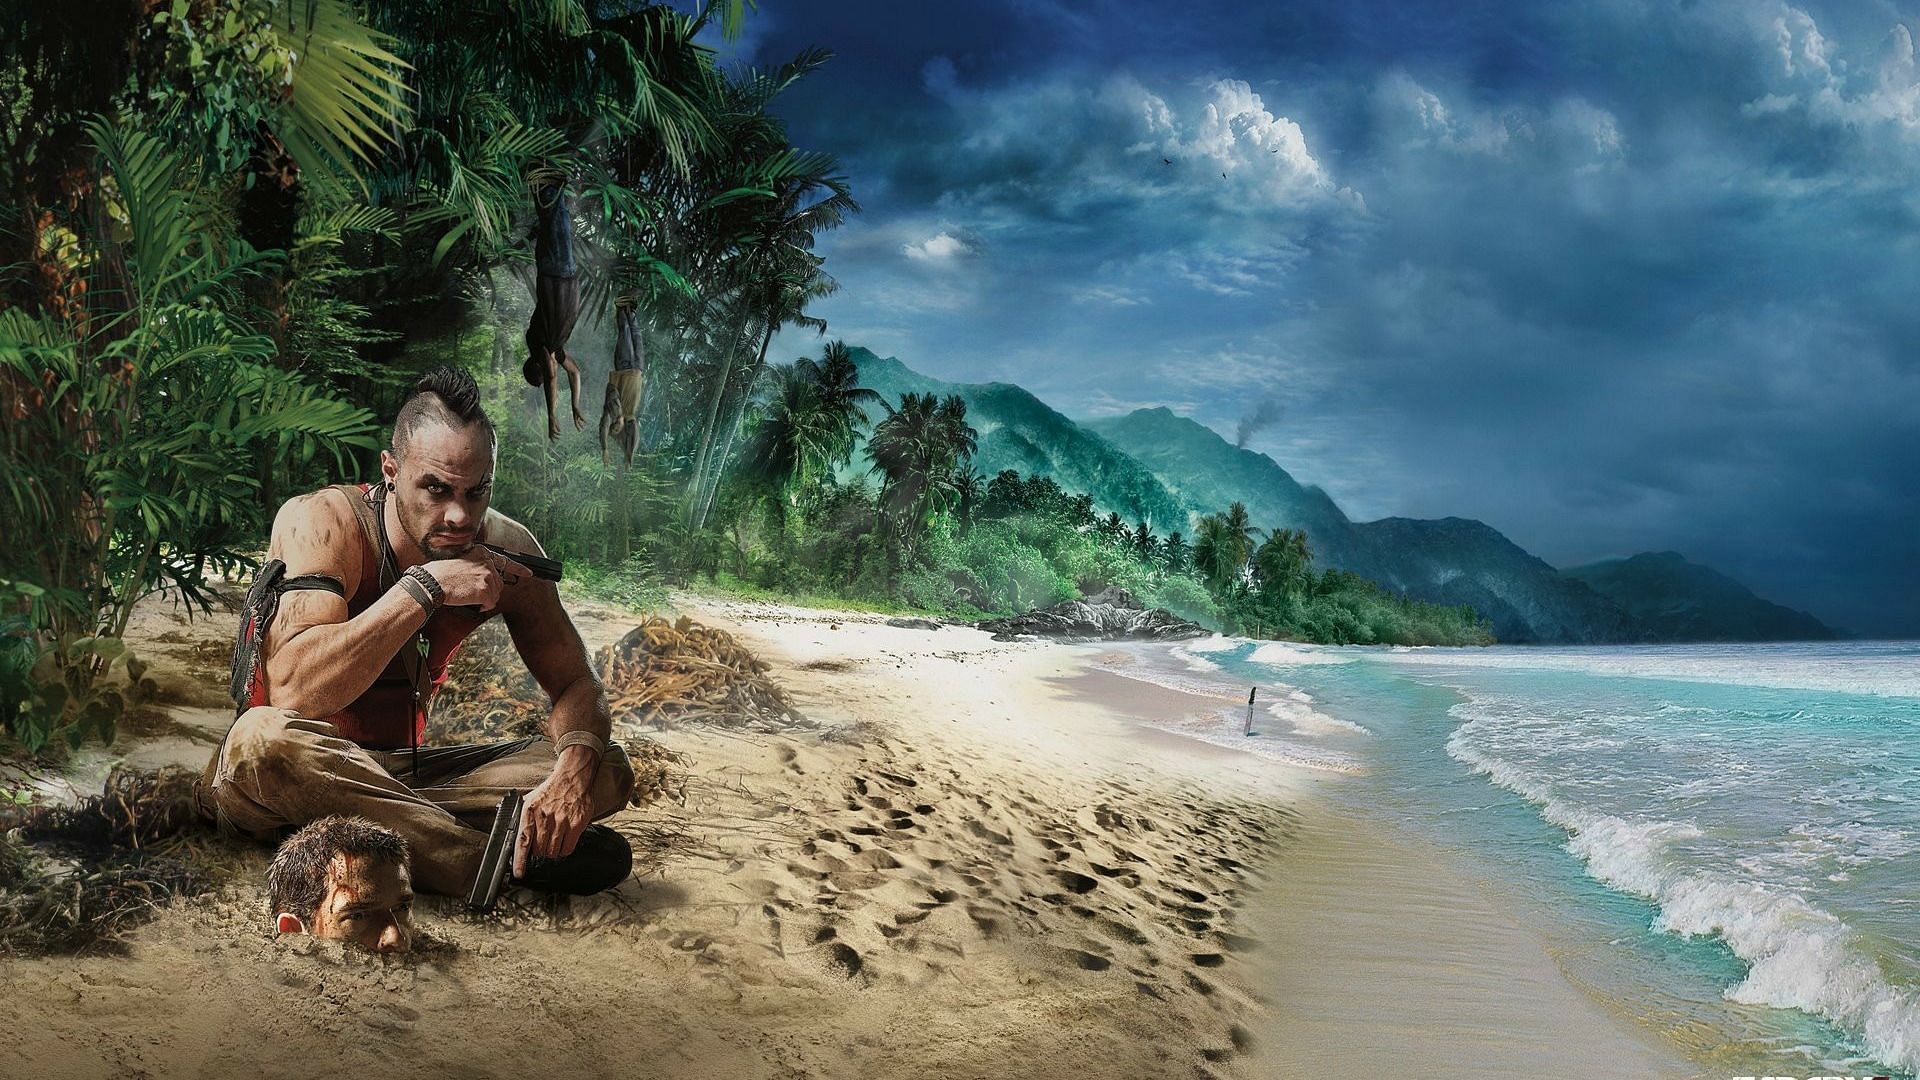 Promotional image for Far Cry 3 (image by Ubisoft)